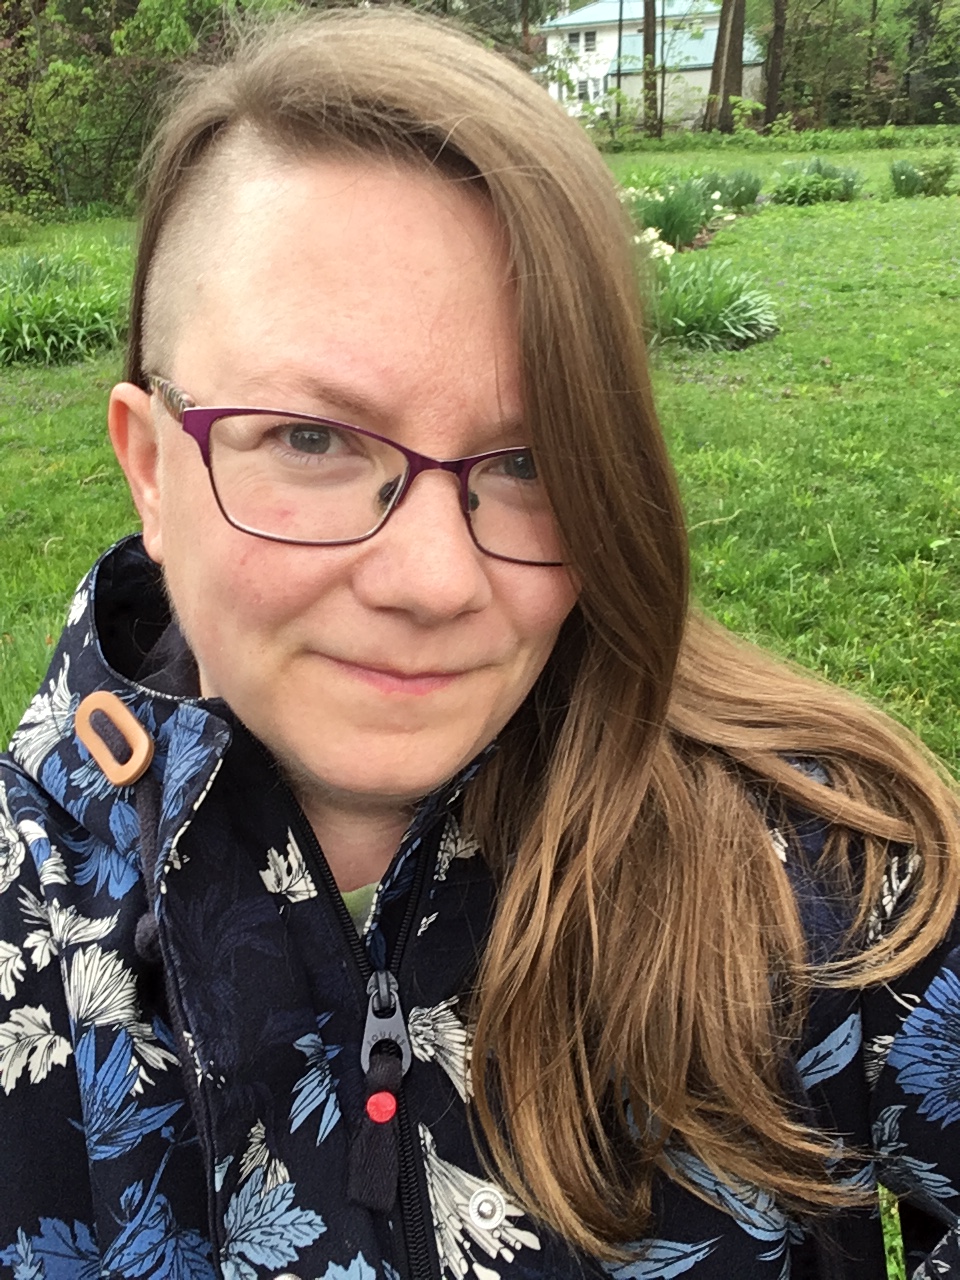 Photo of blog author, River, wearing a blue raincoat. They are wearing glasses, and have long hair, and a close-side shave. Behind them is green grass and flowers.